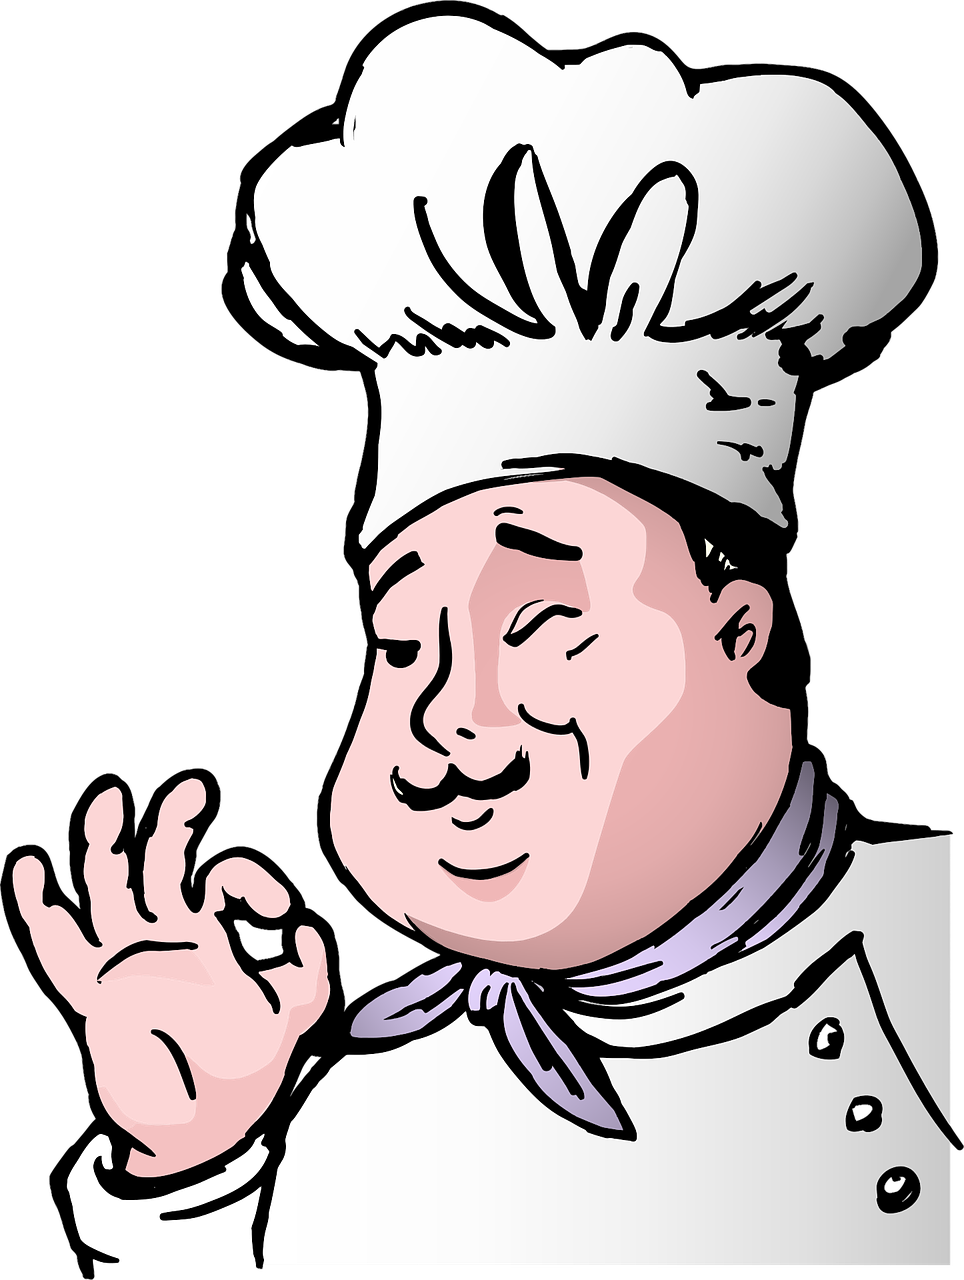 a close up of a person wearing a chef's hat, by Loren Munk, pixabay, arbeitsrat für kunst, svg comic style, chris farley, on black background, awkward situation